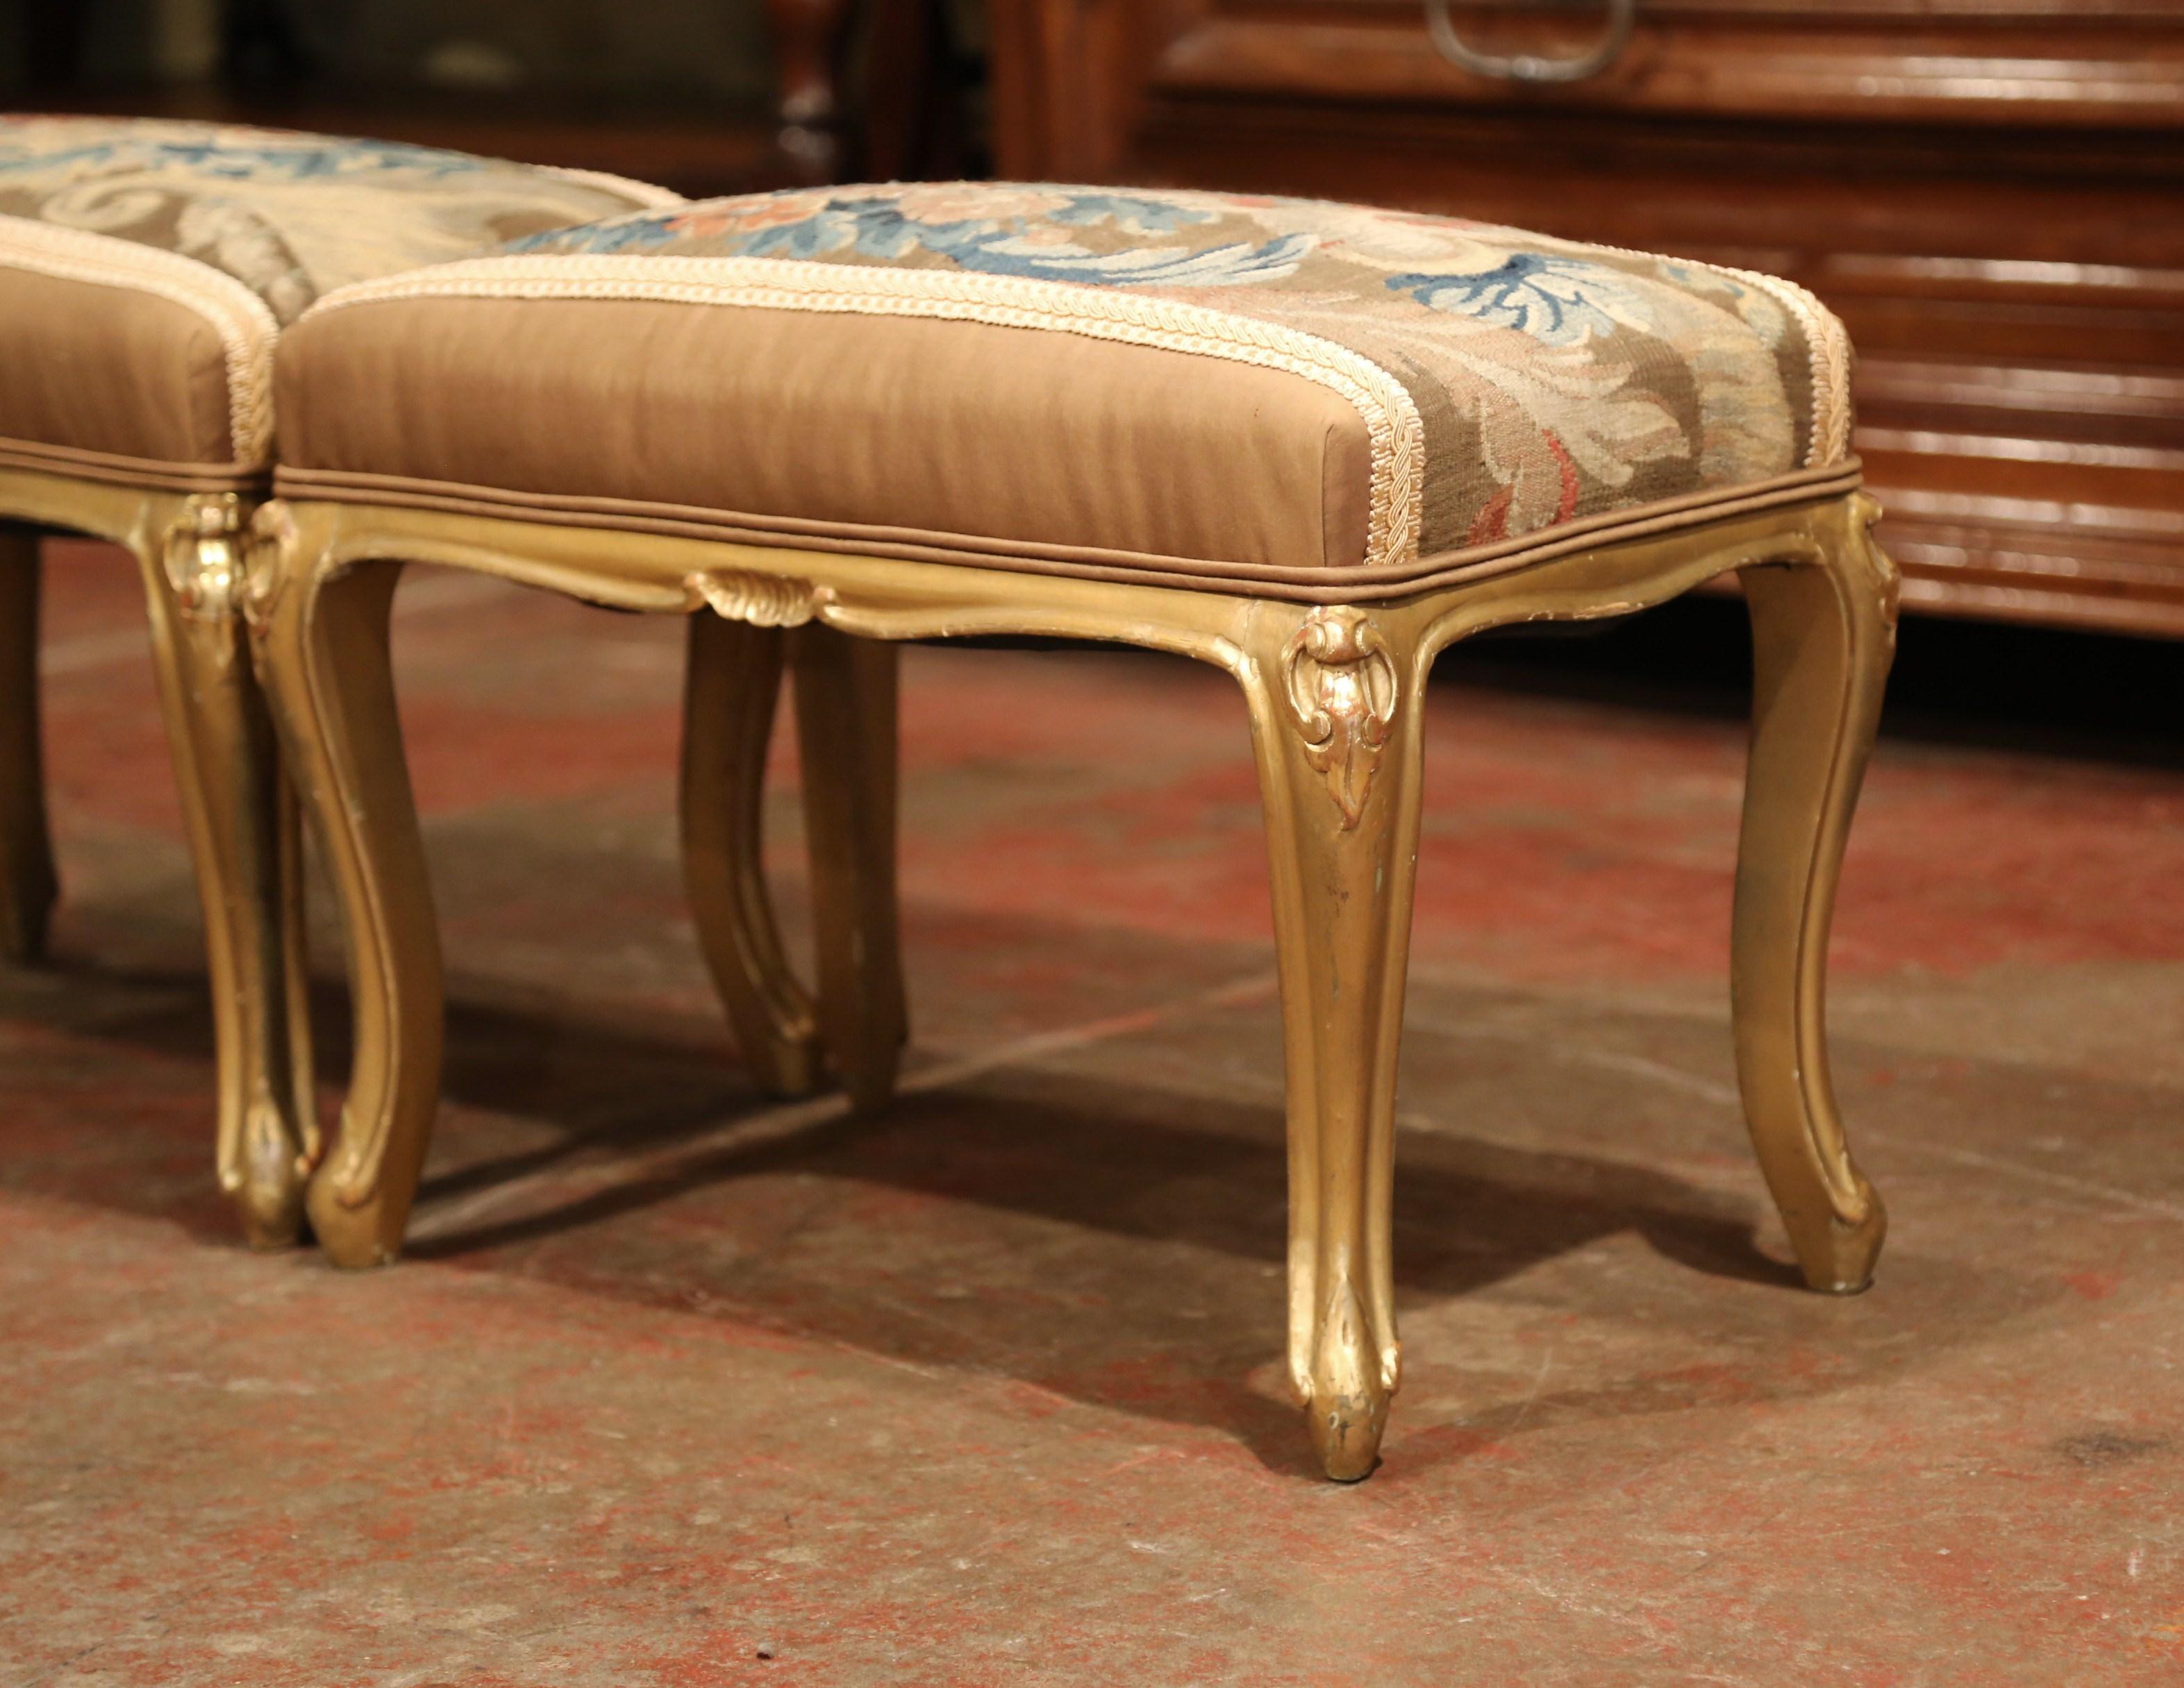 Pair of 19th Century Louis XV Carved Giltwood Stools with Aubusson Tapestry (19. Jahrhundert)